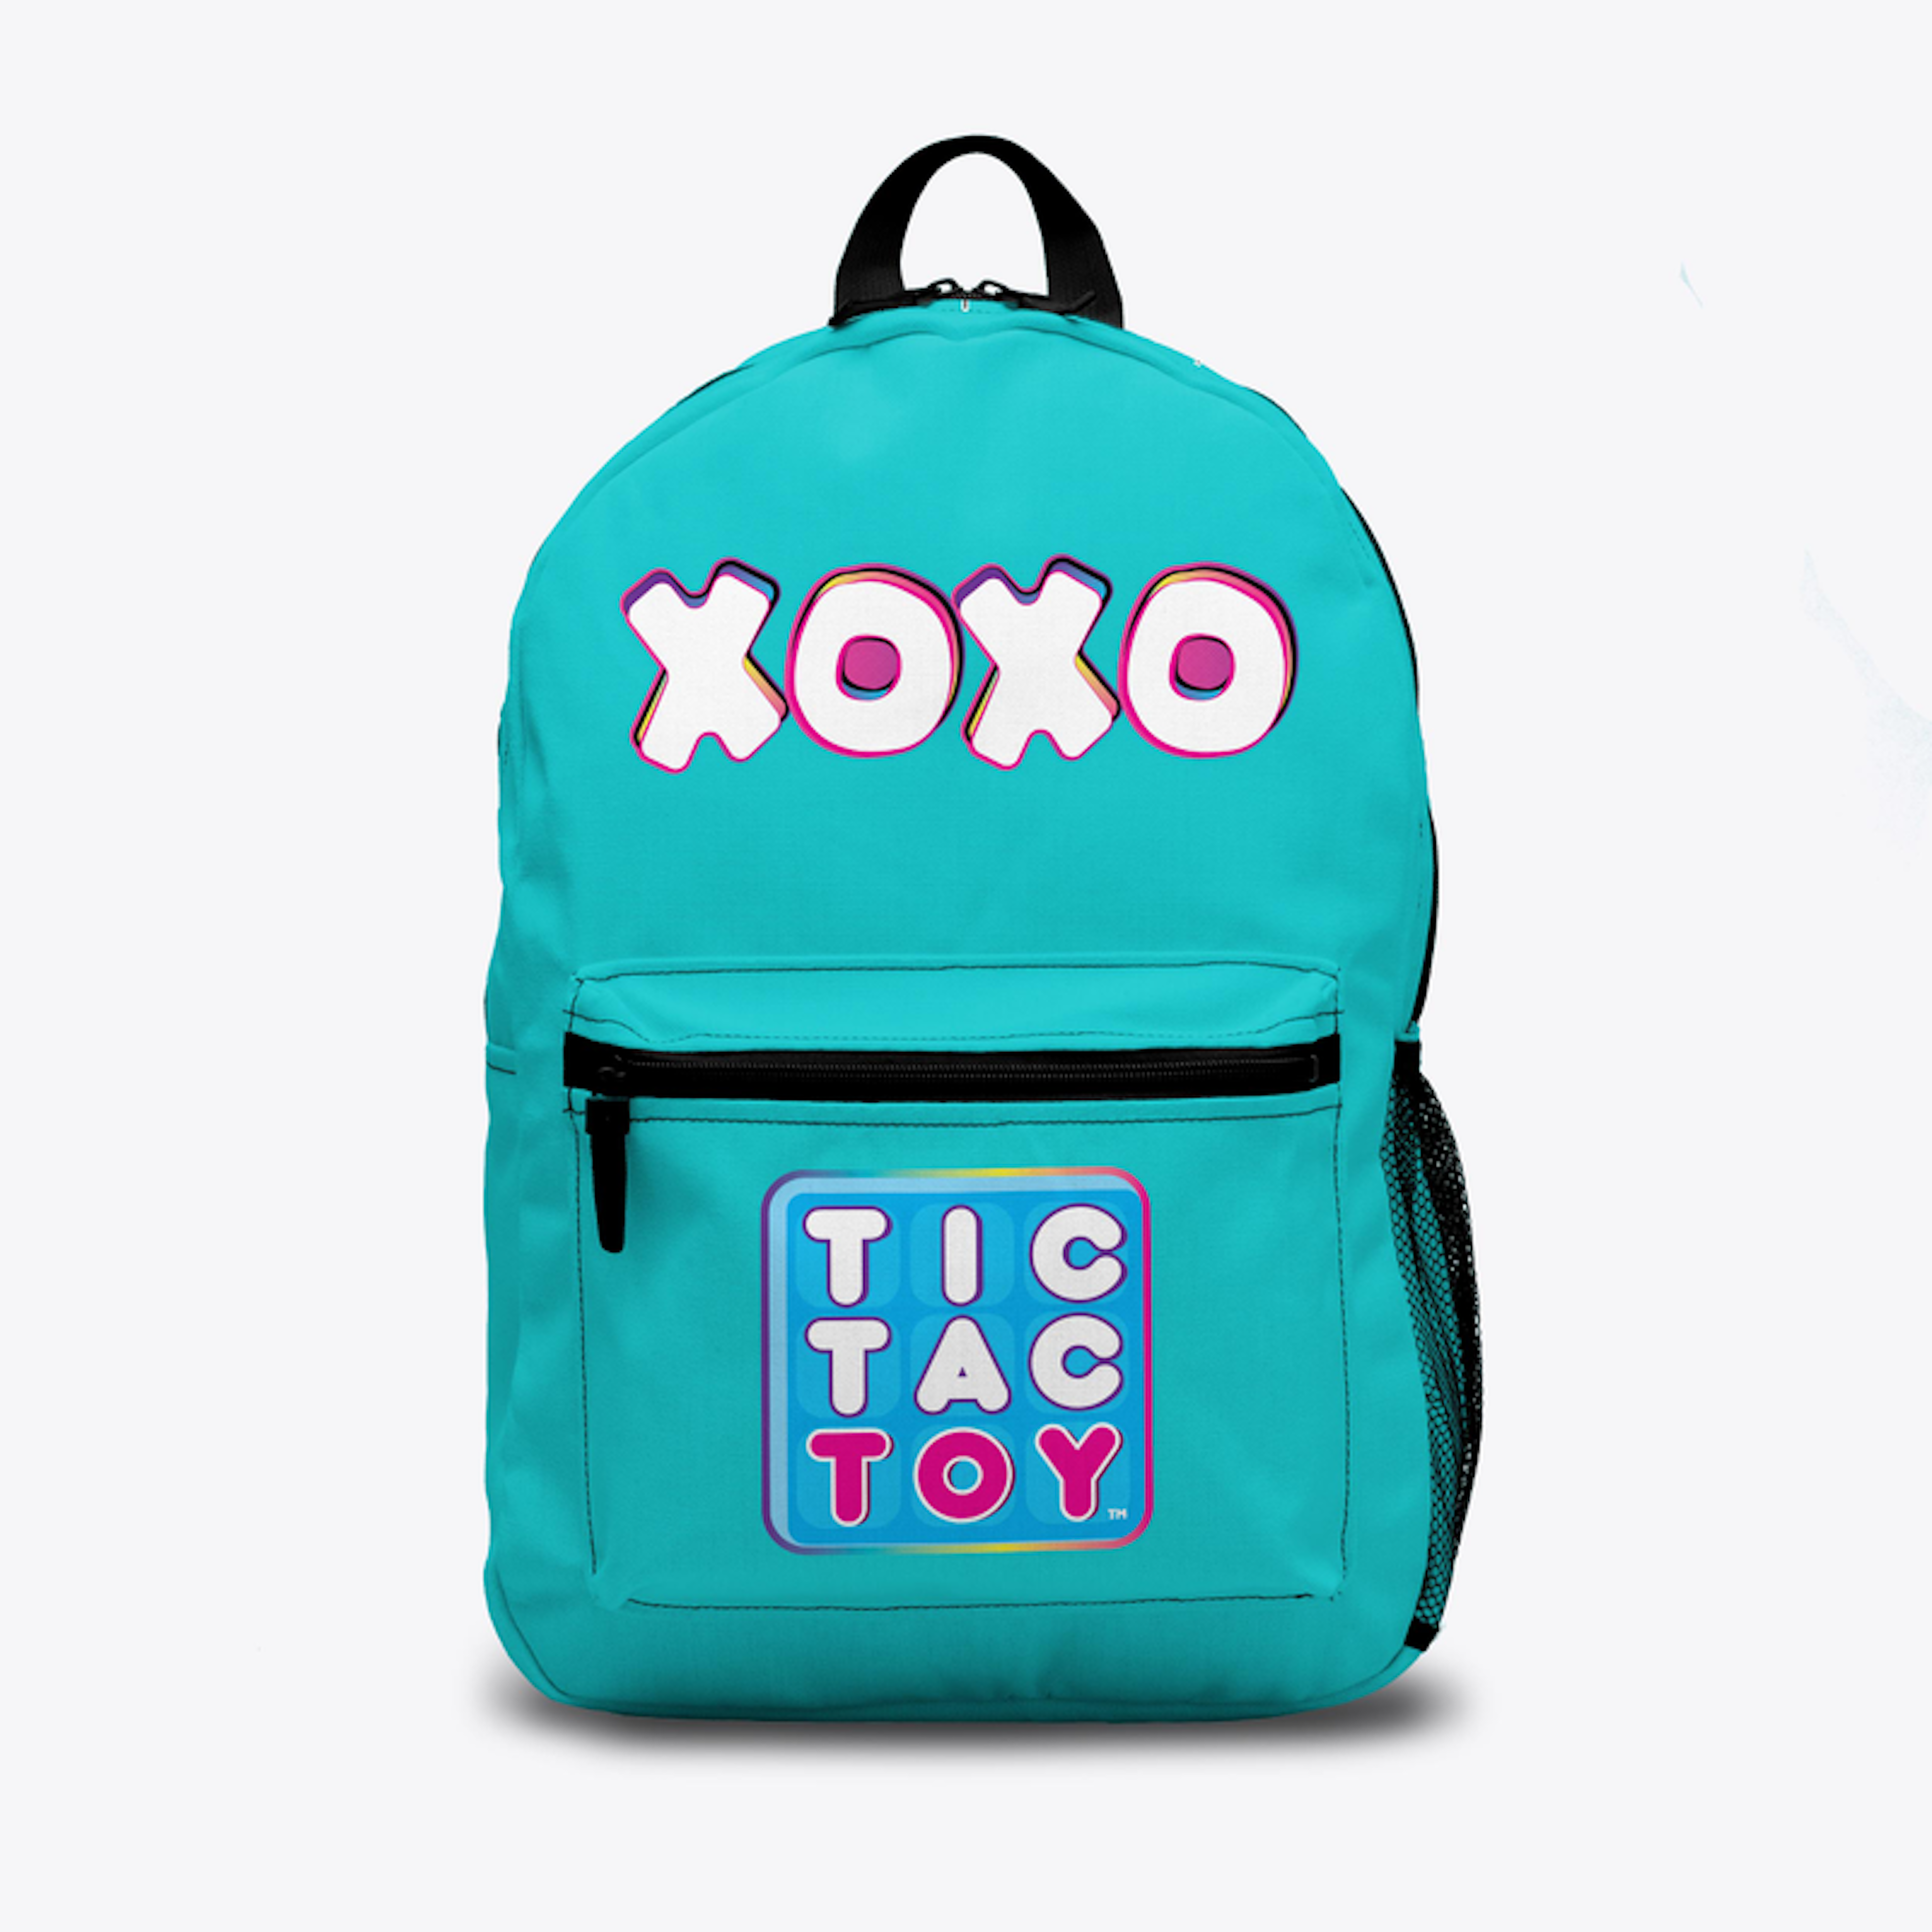 Backpack (Turquoise)